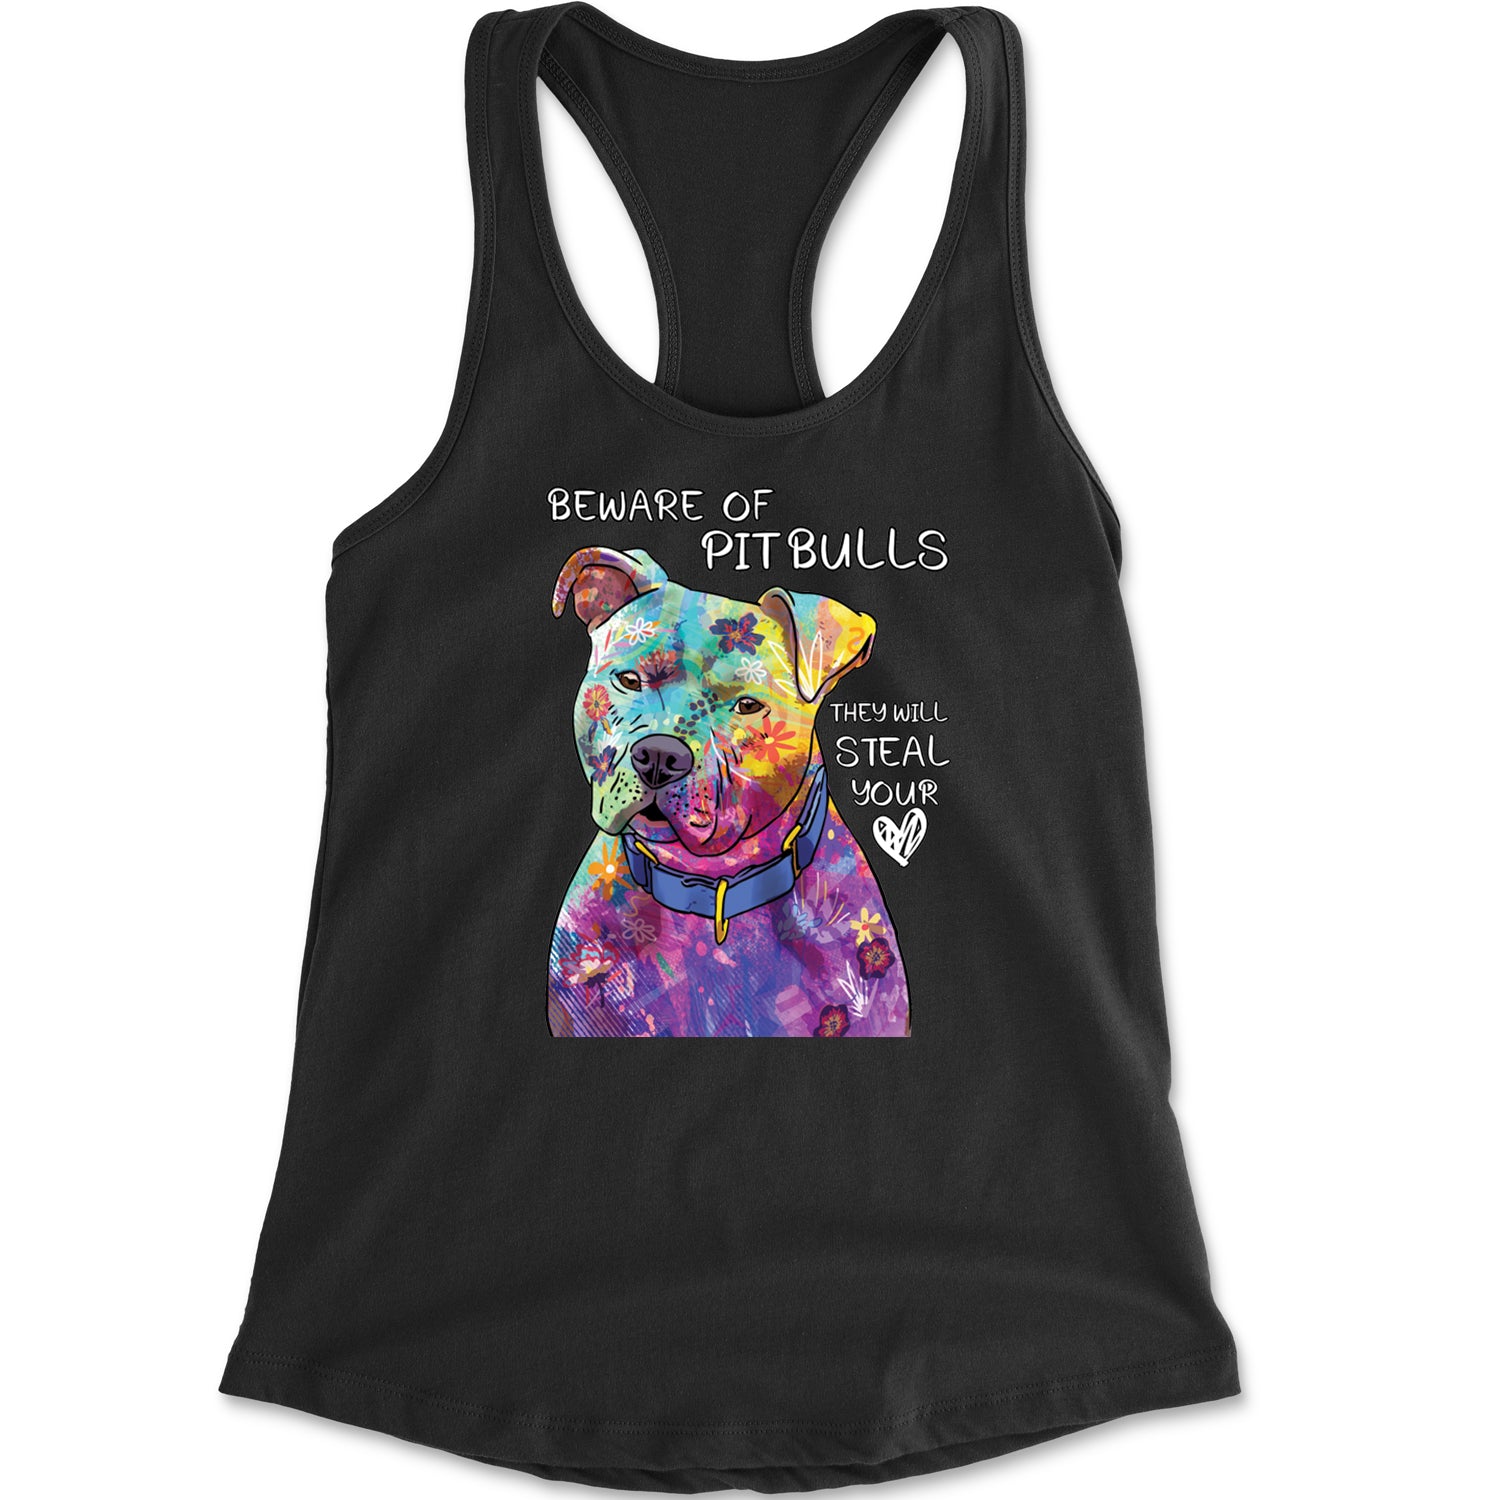 Beware Of Pit Bulls, They Will Steal Your Heart  Racerback Tank Top for Women